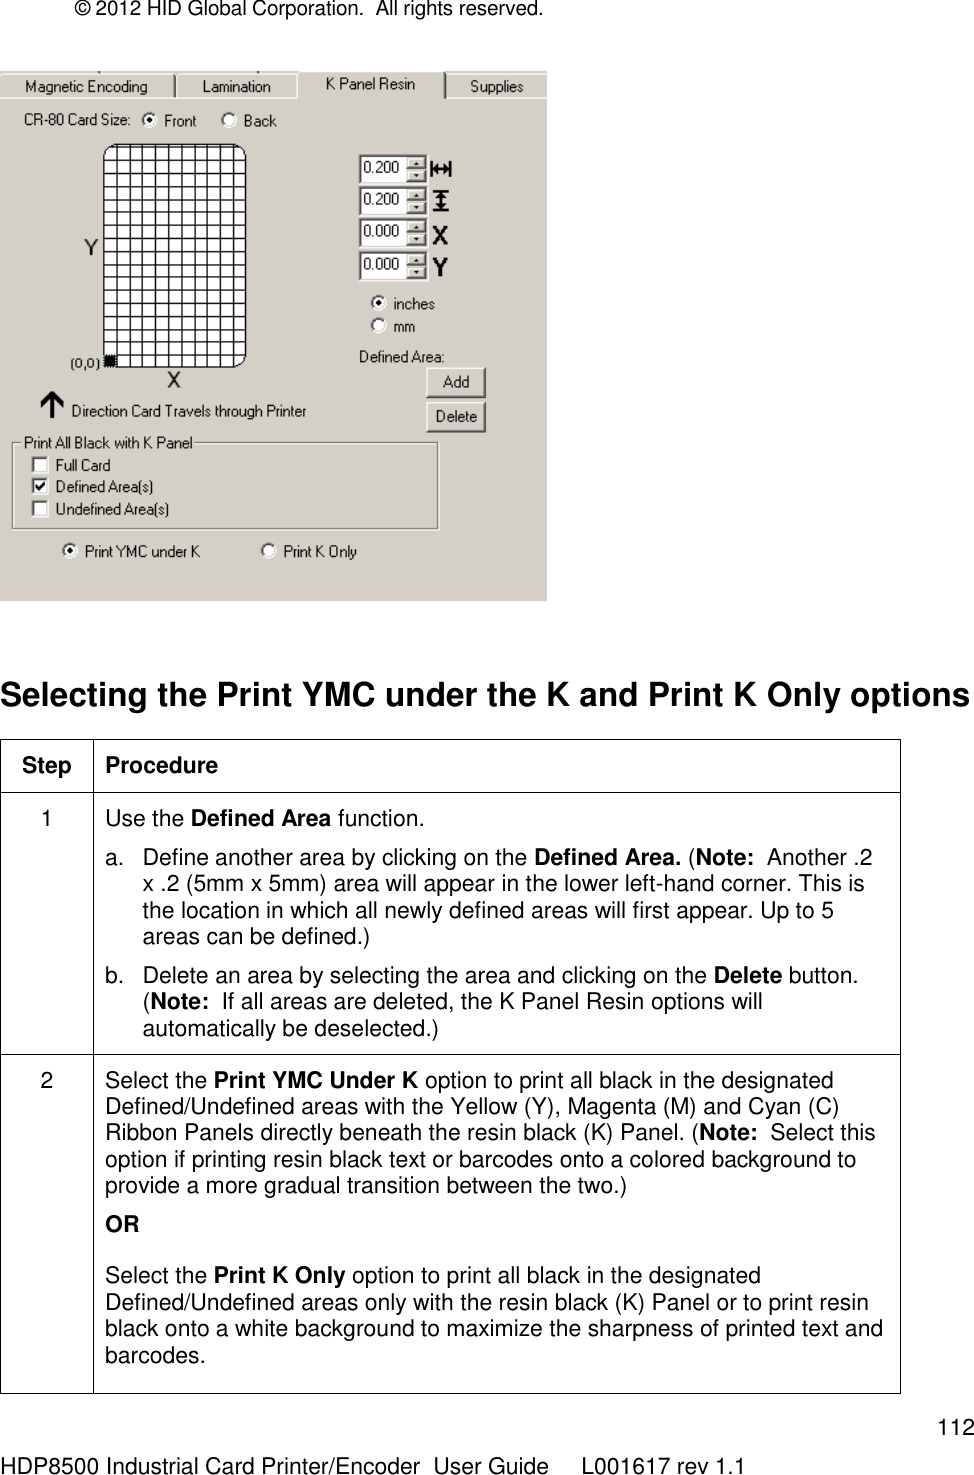 © 2012 HID Global Corporation.  All rights reserved.  112 HDP8500 Industrial Card Printer/Encoder  User Guide     L001617 rev 1.1   Selecting the Print YMC under the K and Print K Only options Step Procedure 1 Use the Defined Area function. a.  Define another area by clicking on the Defined Area. (Note:  Another .2 x .2 (5mm x 5mm) area will appear in the lower left-hand corner. This is the location in which all newly defined areas will first appear. Up to 5 areas can be defined.)  b.  Delete an area by selecting the area and clicking on the Delete button. (Note:  If all areas are deleted, the K Panel Resin options will automatically be deselected.)  2 Select the Print YMC Under K option to print all black in the designated Defined/Undefined areas with the Yellow (Y), Magenta (M) and Cyan (C) Ribbon Panels directly beneath the resin black (K) Panel. (Note:  Select this option if printing resin black text or barcodes onto a colored background to provide a more gradual transition between the two.)  OR Select the Print K Only option to print all black in the designated Defined/Undefined areas only with the resin black (K) Panel or to print resin black onto a white background to maximize the sharpness of printed text and barcodes.  